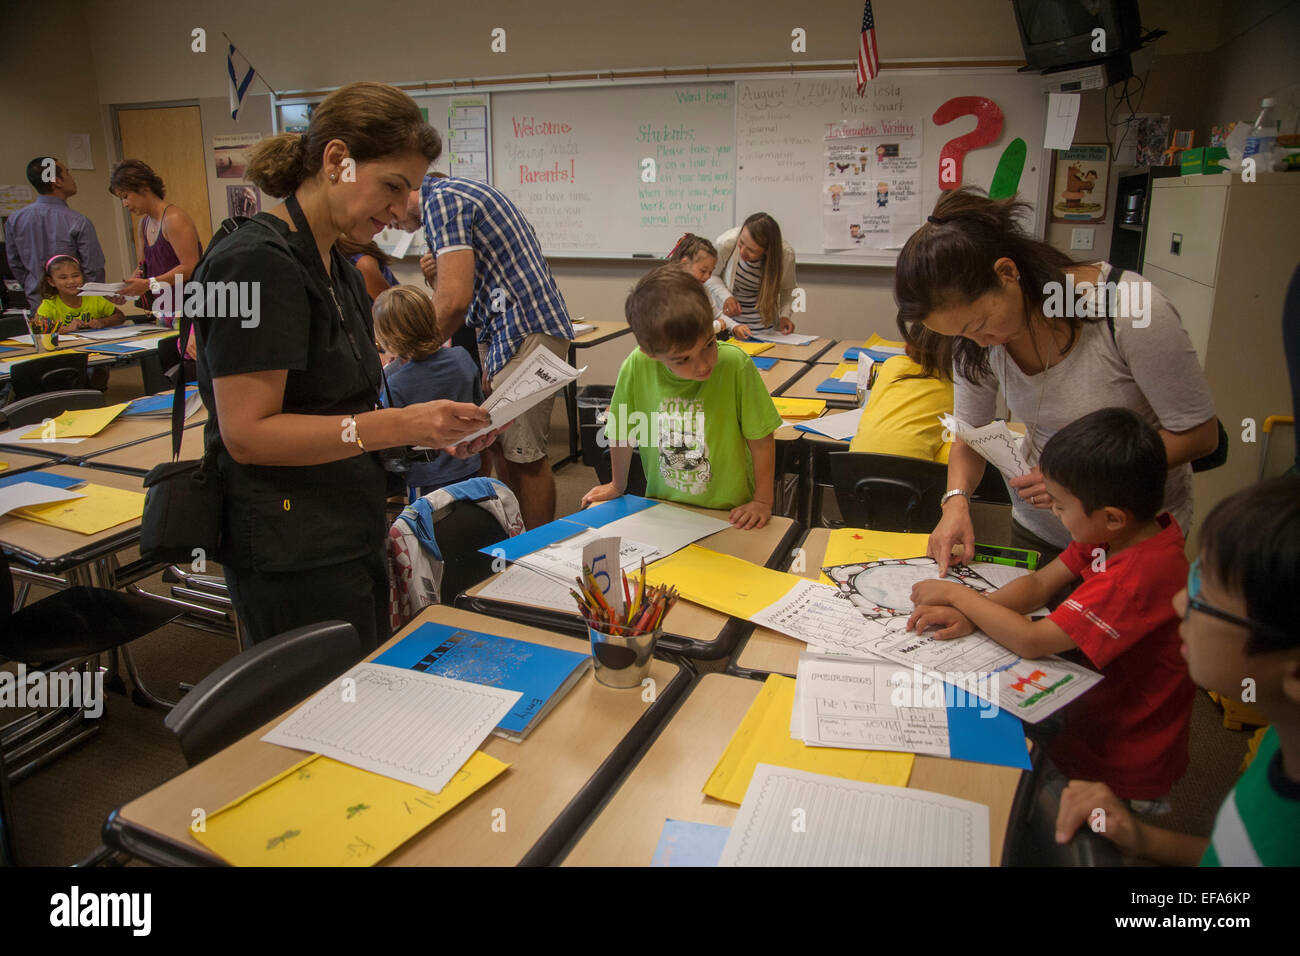 Parents and children mix in an Irvine, CA, elementary school classroom on parents day. Note welcome sign in background. Stock Photo